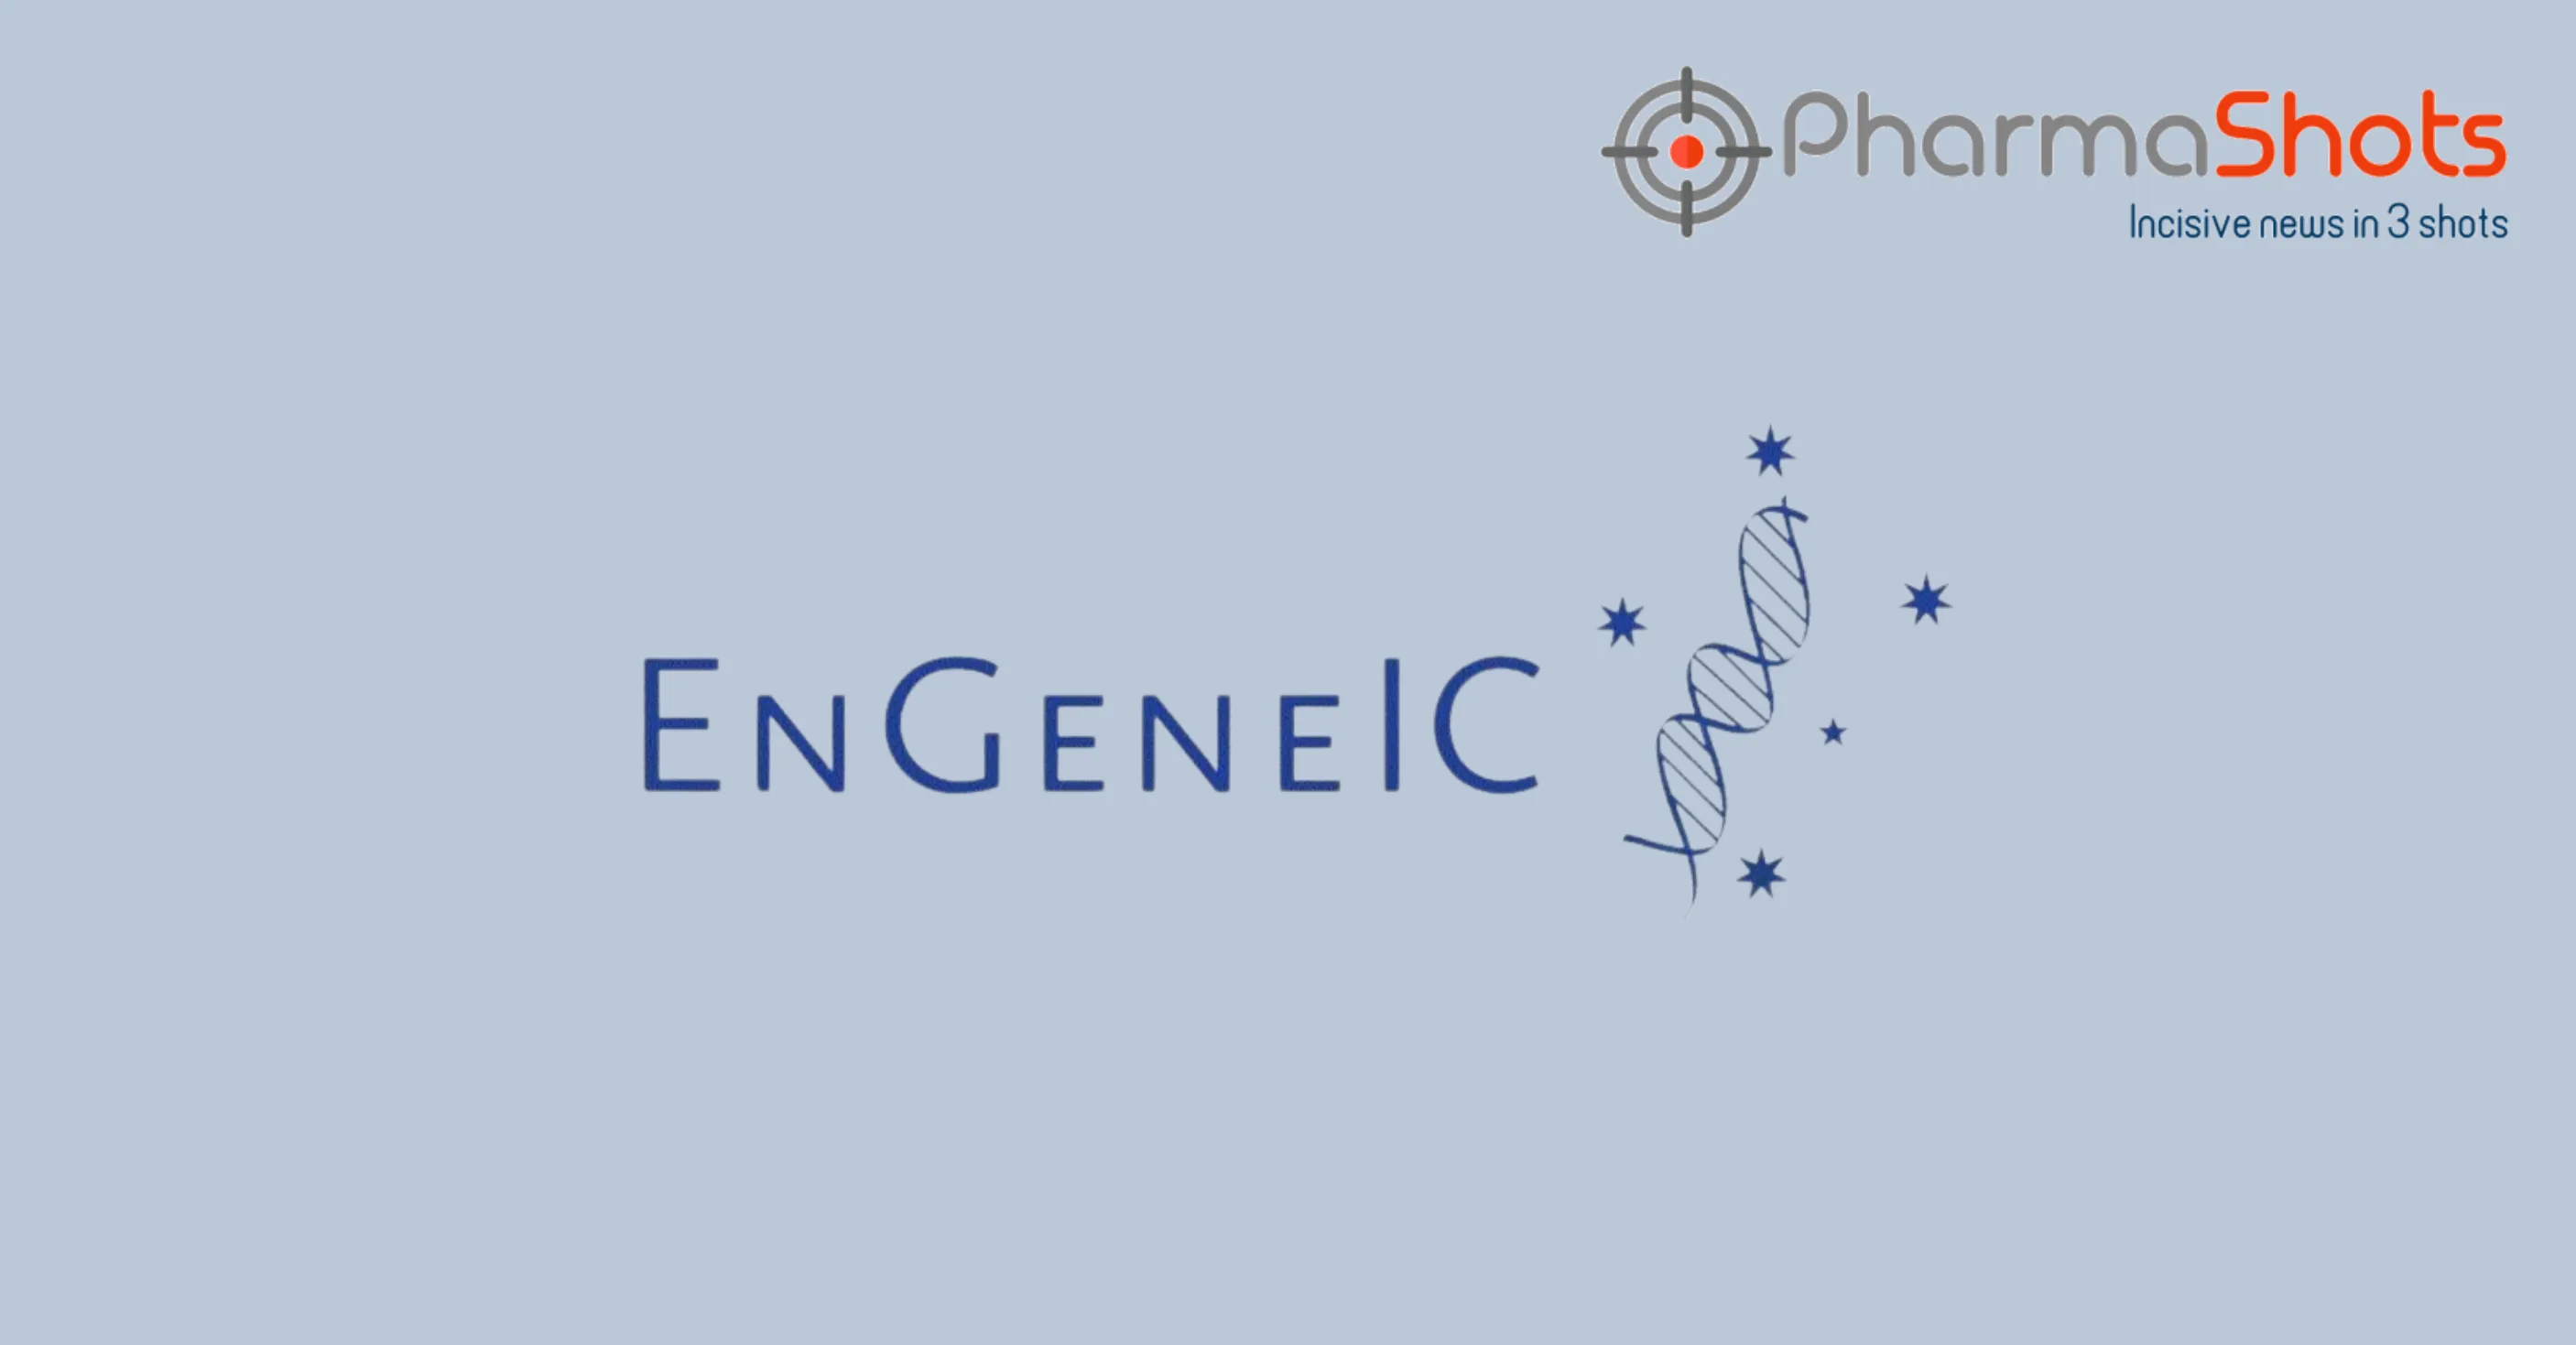 EnGeneIC’s Reports the Results from The Carolyn Trial of EnGeneIC Dream Vector (EDV) Nanocell Treatment for Pancreatic Cancer Patients